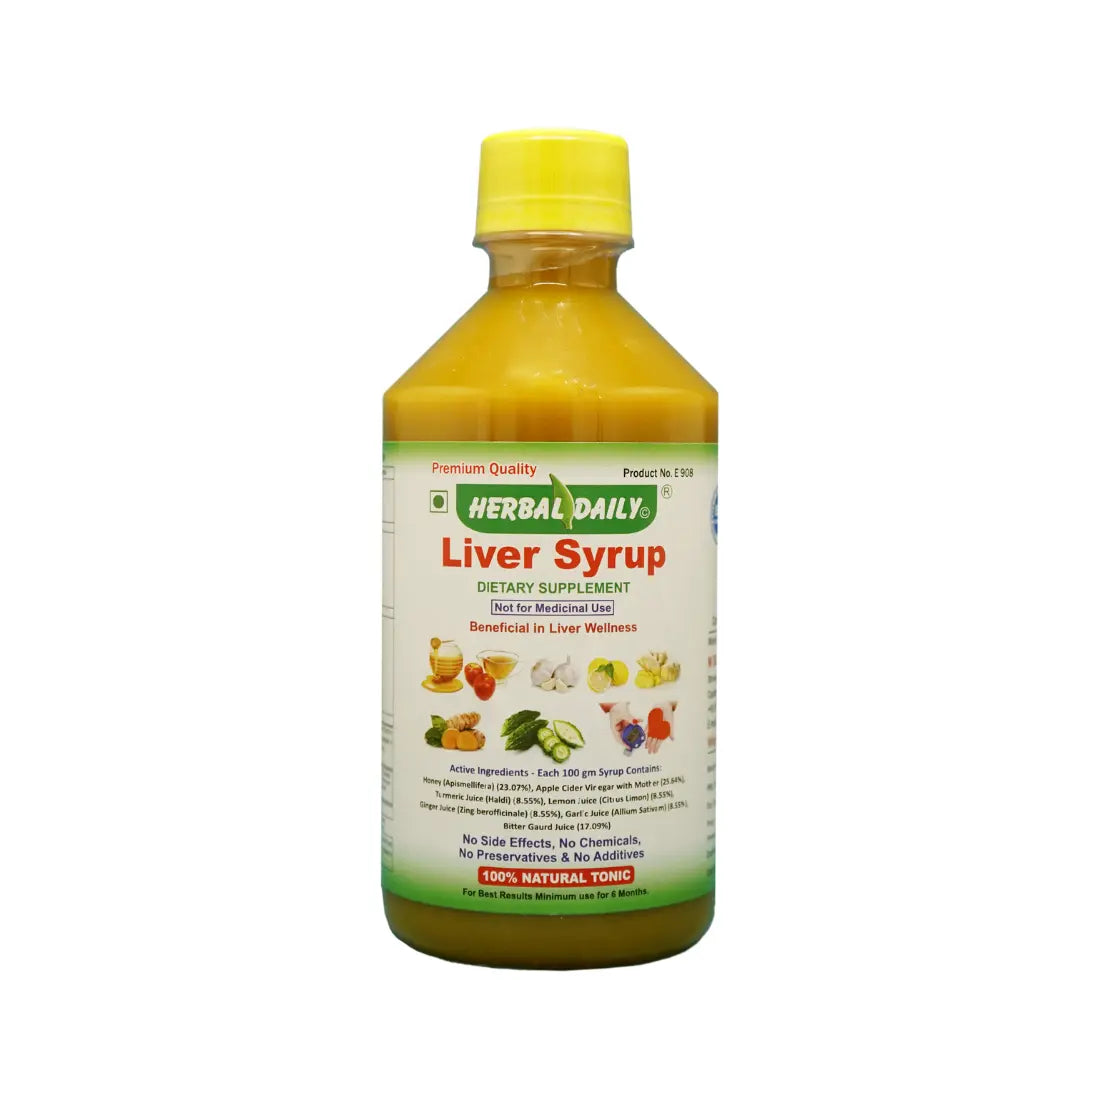 Liver Detox & Wellness Combo Beneficial in Liver Cleanse, Body Detox & Repair | Liver Syrup 400 ml | Liver Wellness, Liver Wellwisher Contains 180 veg. capsule Each